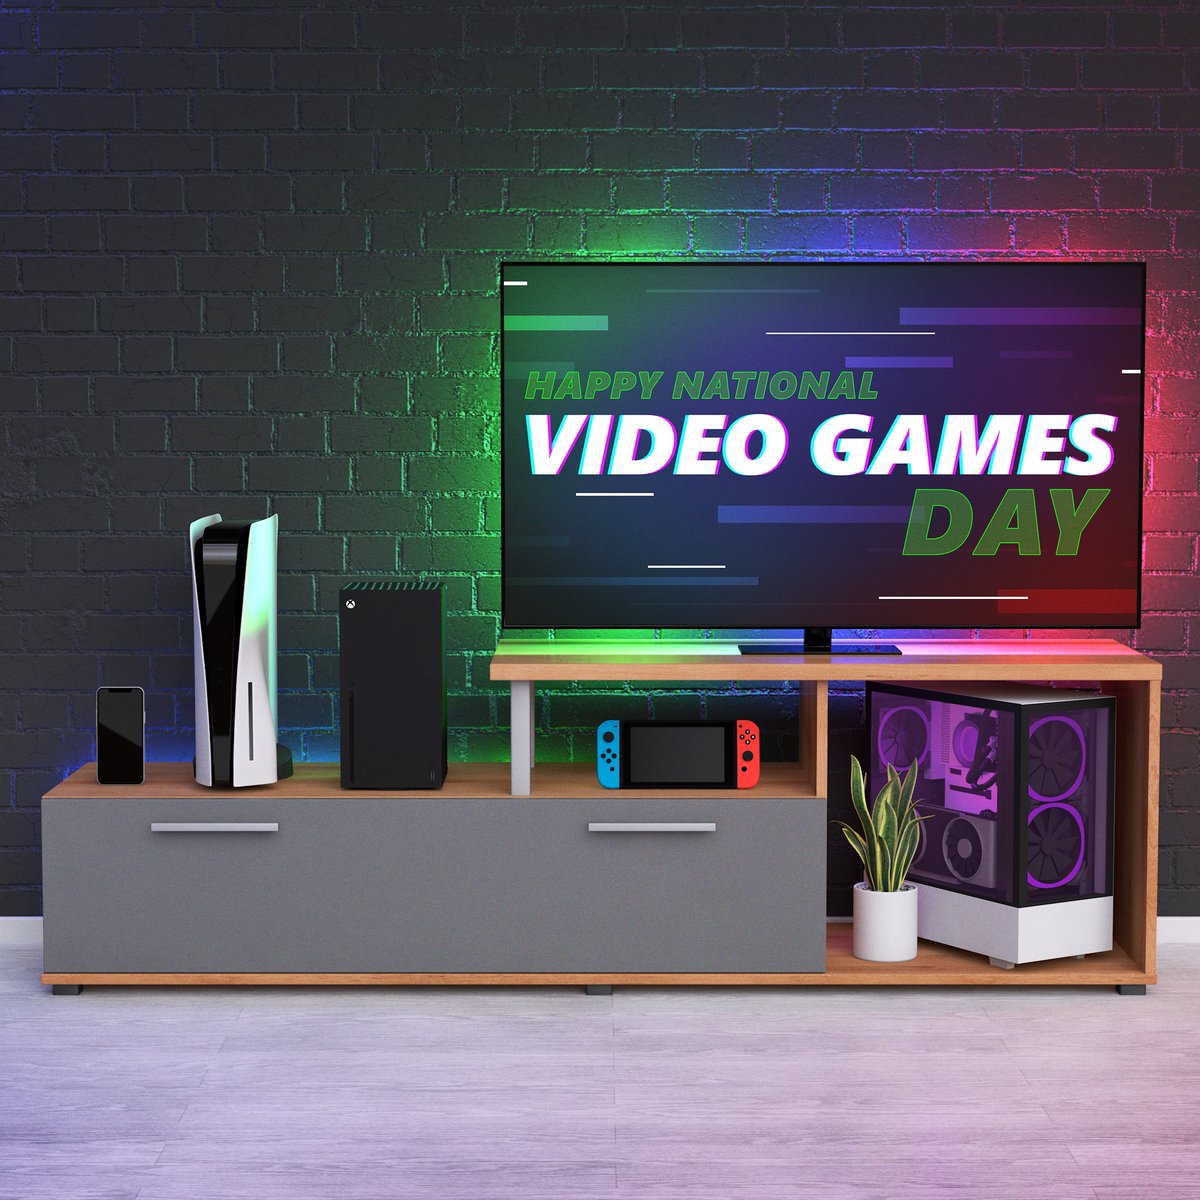 RT @Xbox: The best setups make room for everyone @Nintendo  @PlayStation #NationalVideoGamesDay https://t.co/g1mrl1eNY9